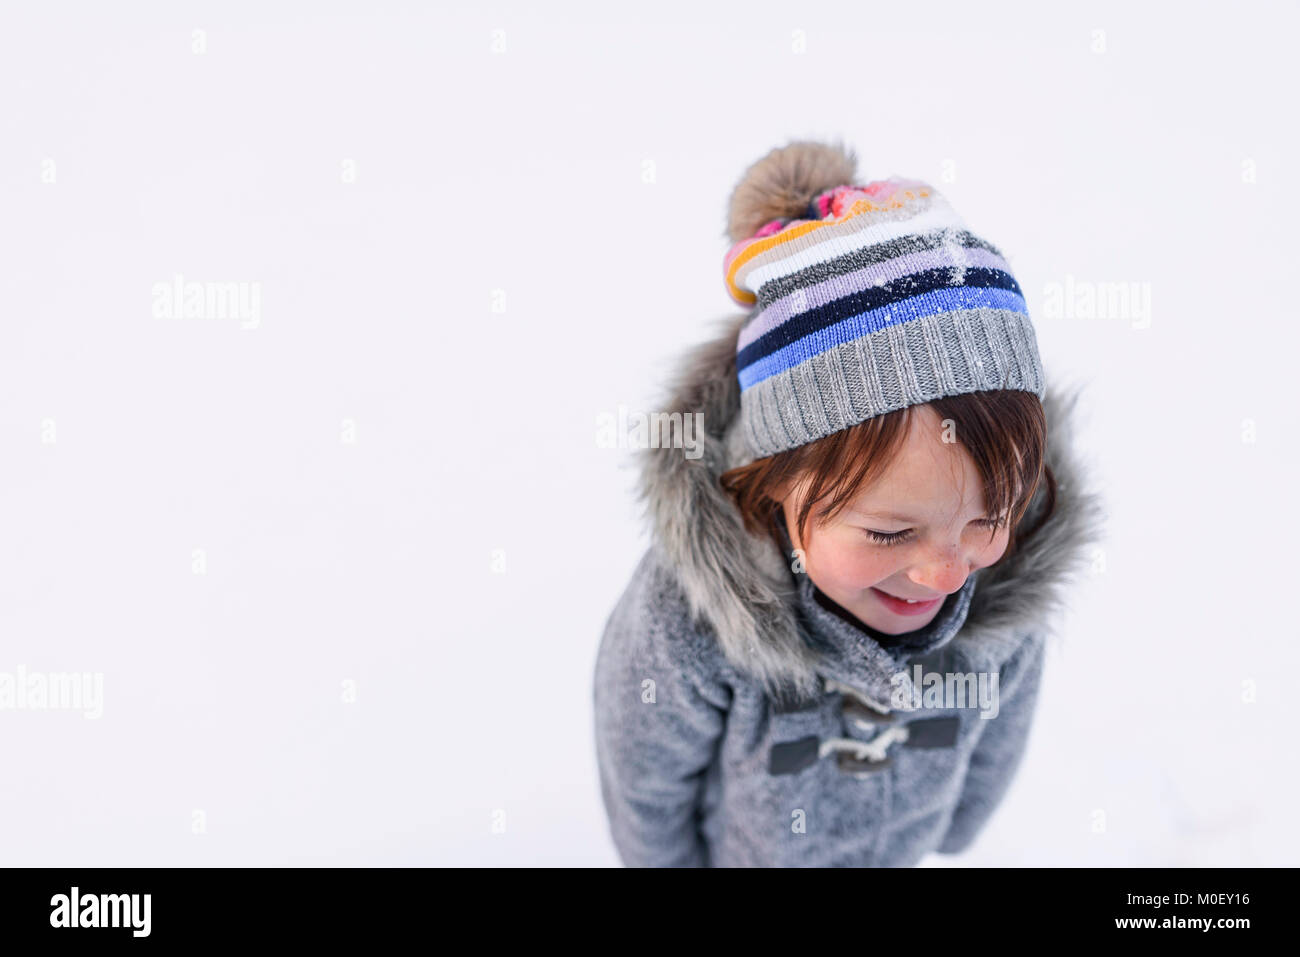 Portrait of a smiling girl standing in the snow Stock Photo